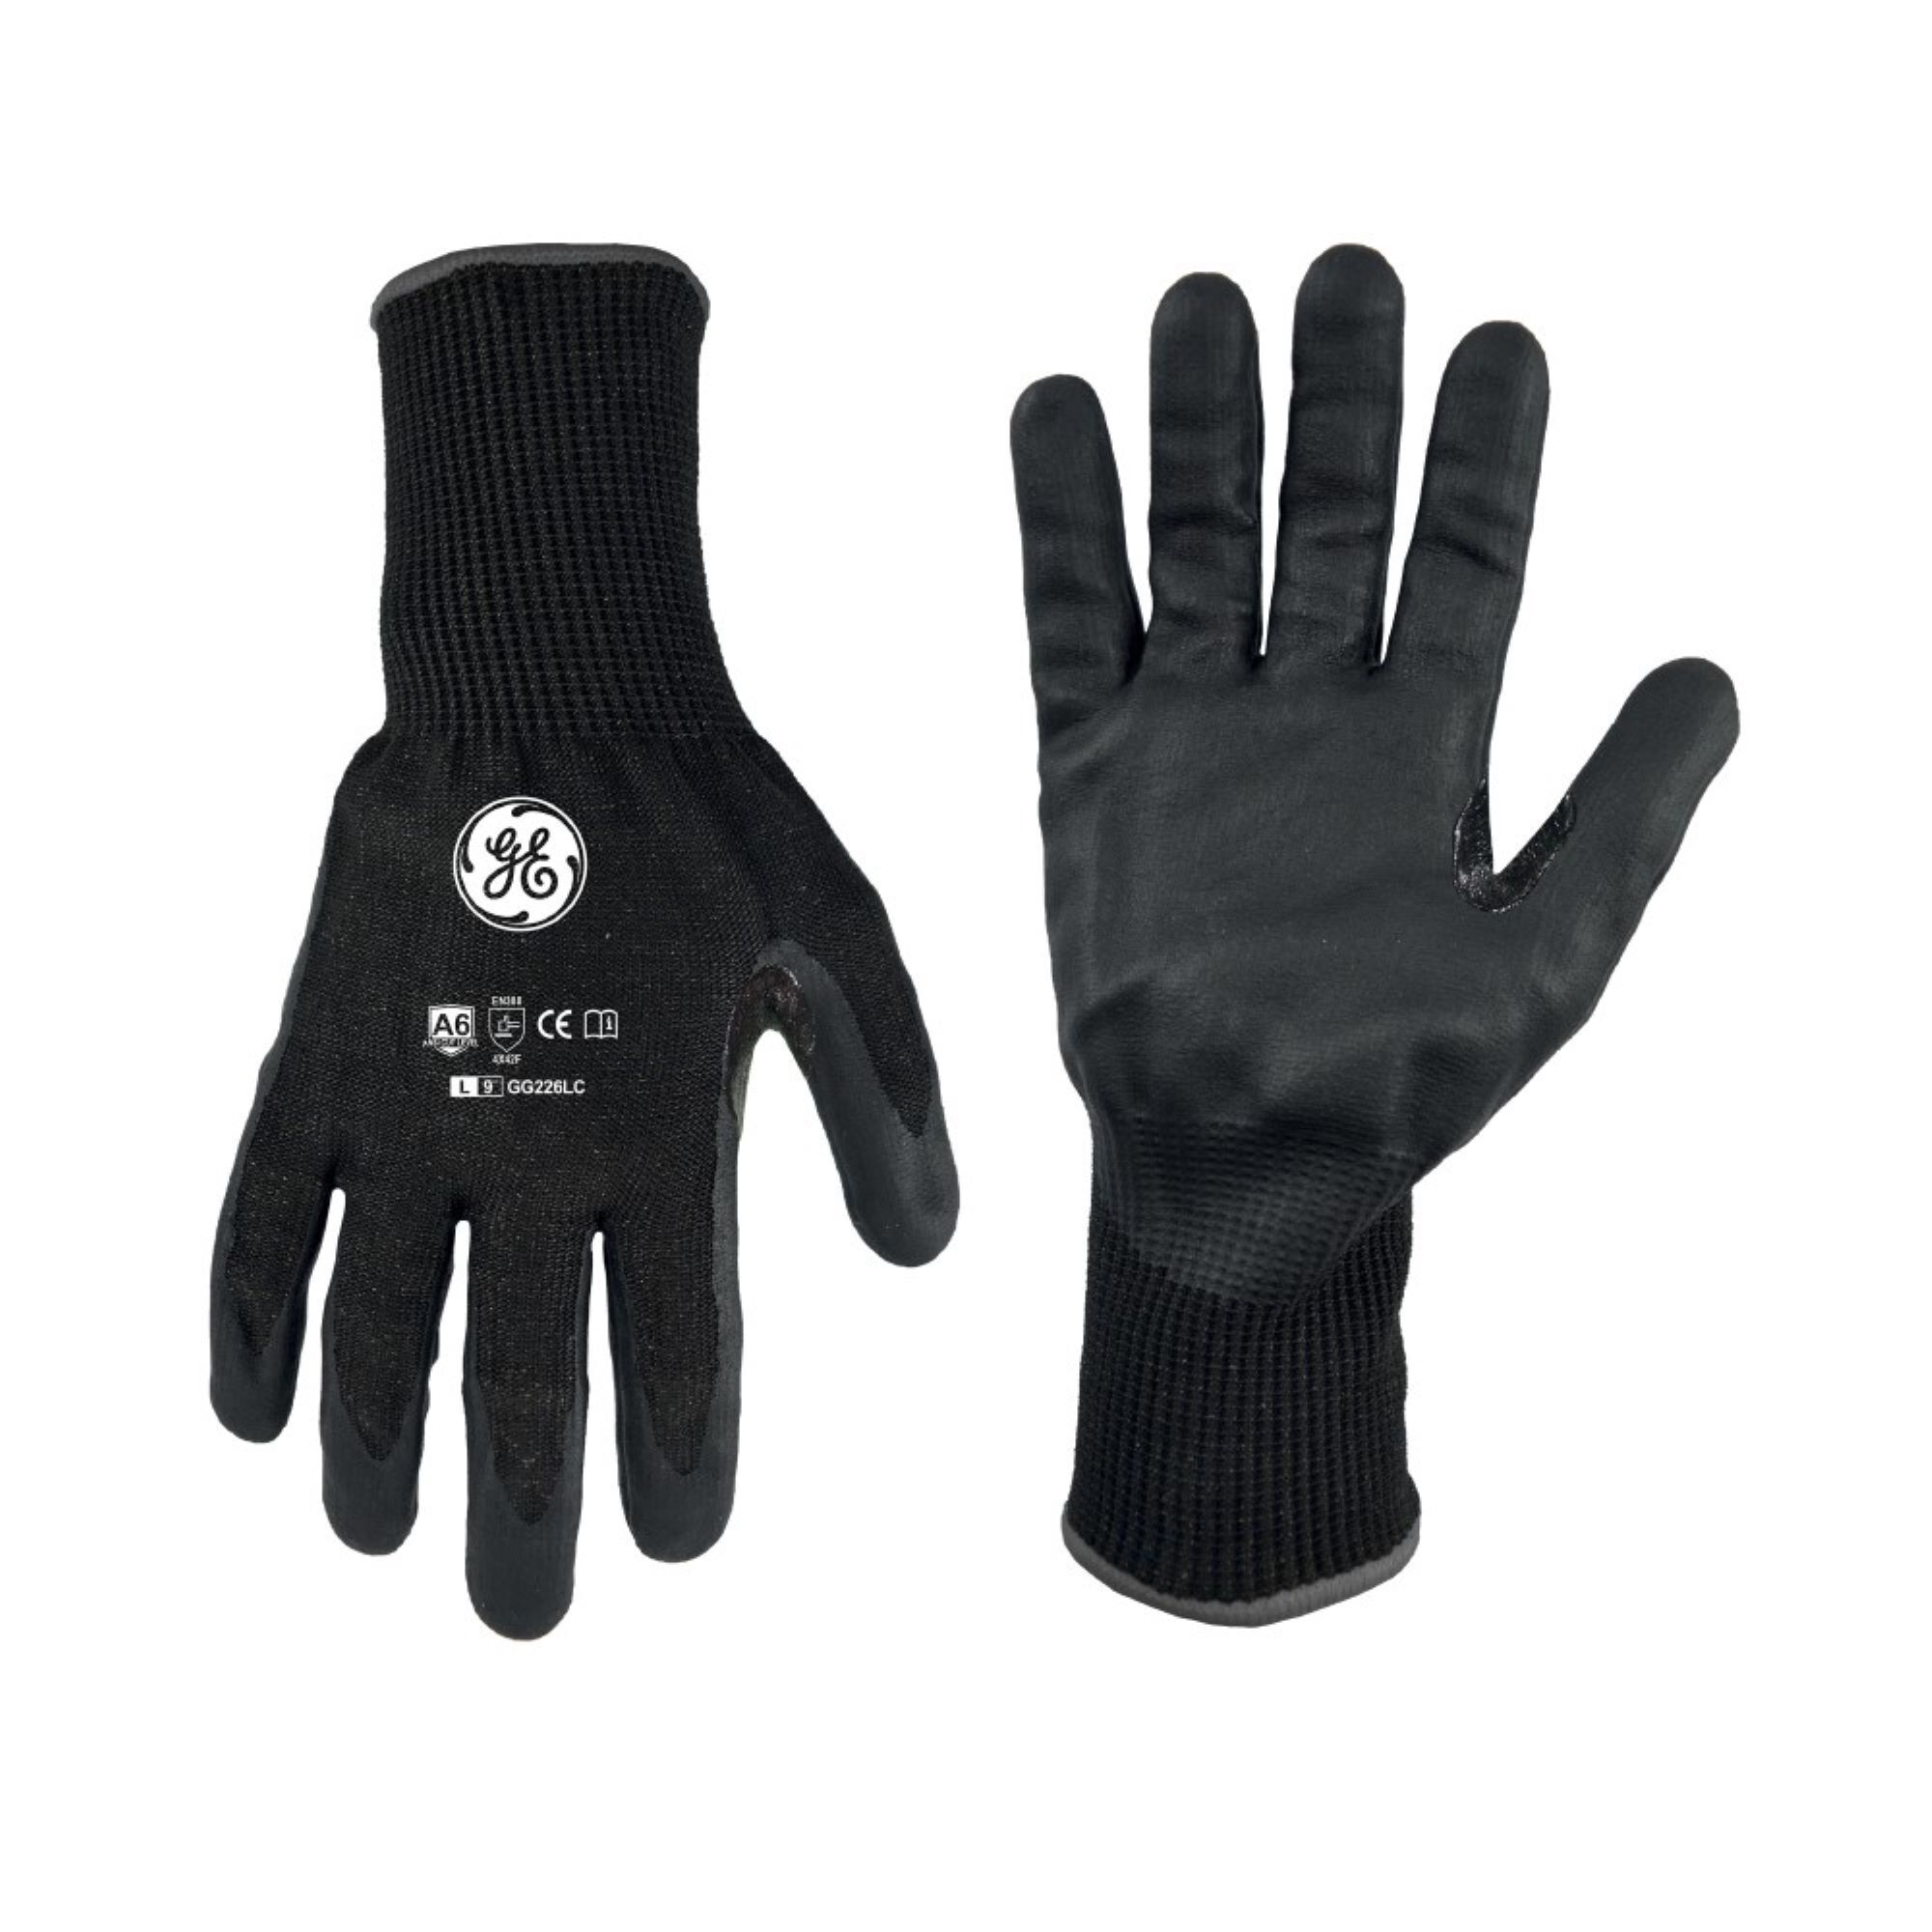 General Electric, L Foam Nitrile Black Dipped Gloves 1 pair, Size L, Included (qty.) 1, Model GG226LC